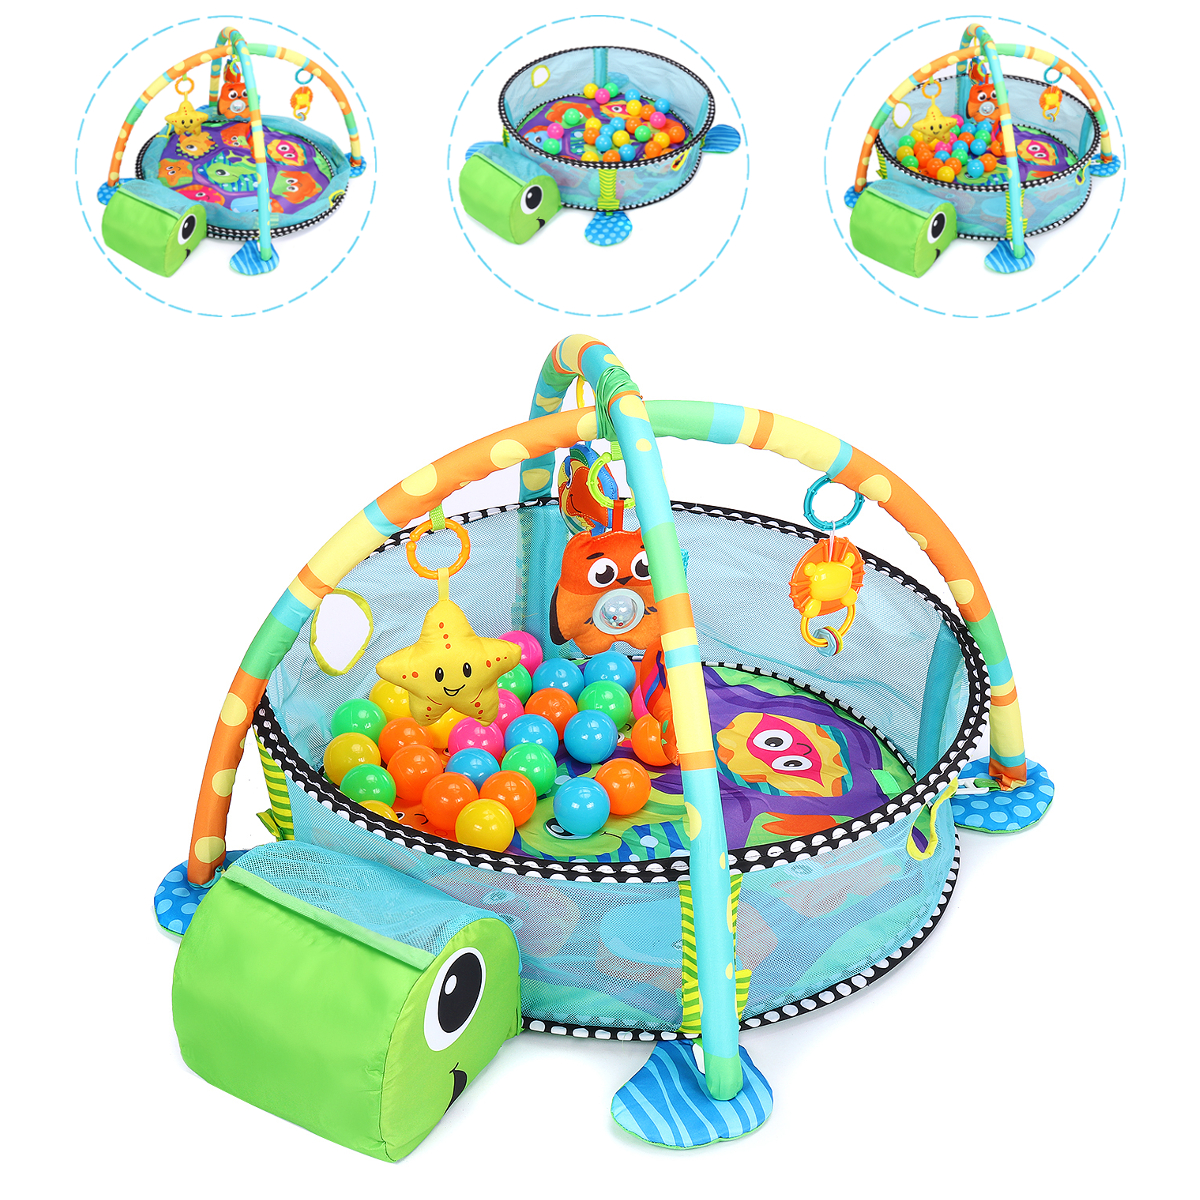 TEAYINGDE 3 in 1 Baby Gym Play Mat Baby Activity with Ocean Ball,Green Turtle - image 1 of 11